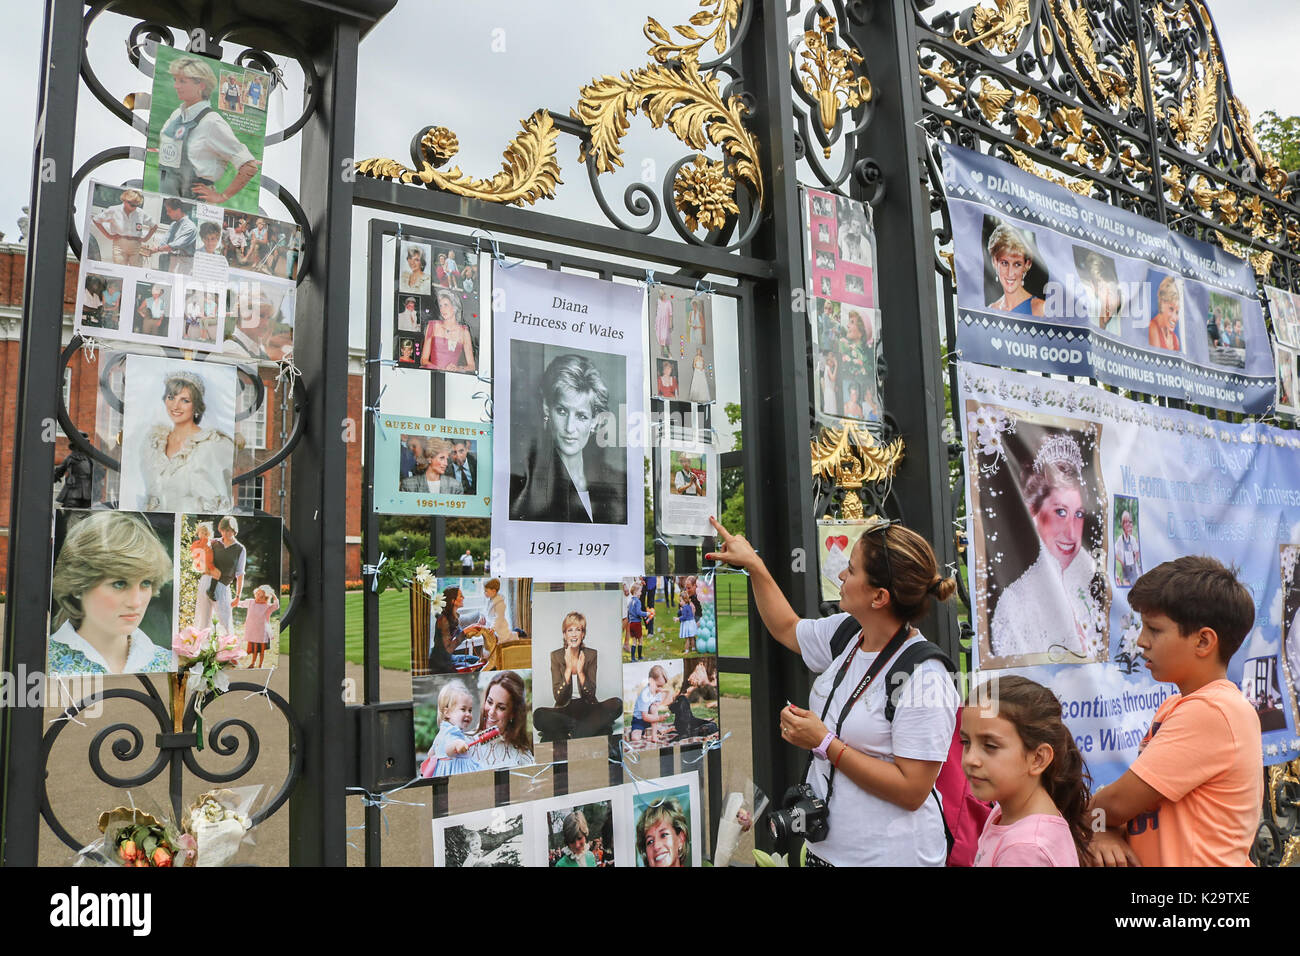 London, UK. 29th Aug, 2017. Members of the public and tourists pay their respect with floral tributes outside Kensington Palace prior to  the 20th anniversary of the death of Diana Princess of Wales who became affectionately known as the People's Princess  was tragically killed in a fatal car accident in Paris on 31st August 1997. Credit: amer ghazzal/Alamy Live News Stock Photo